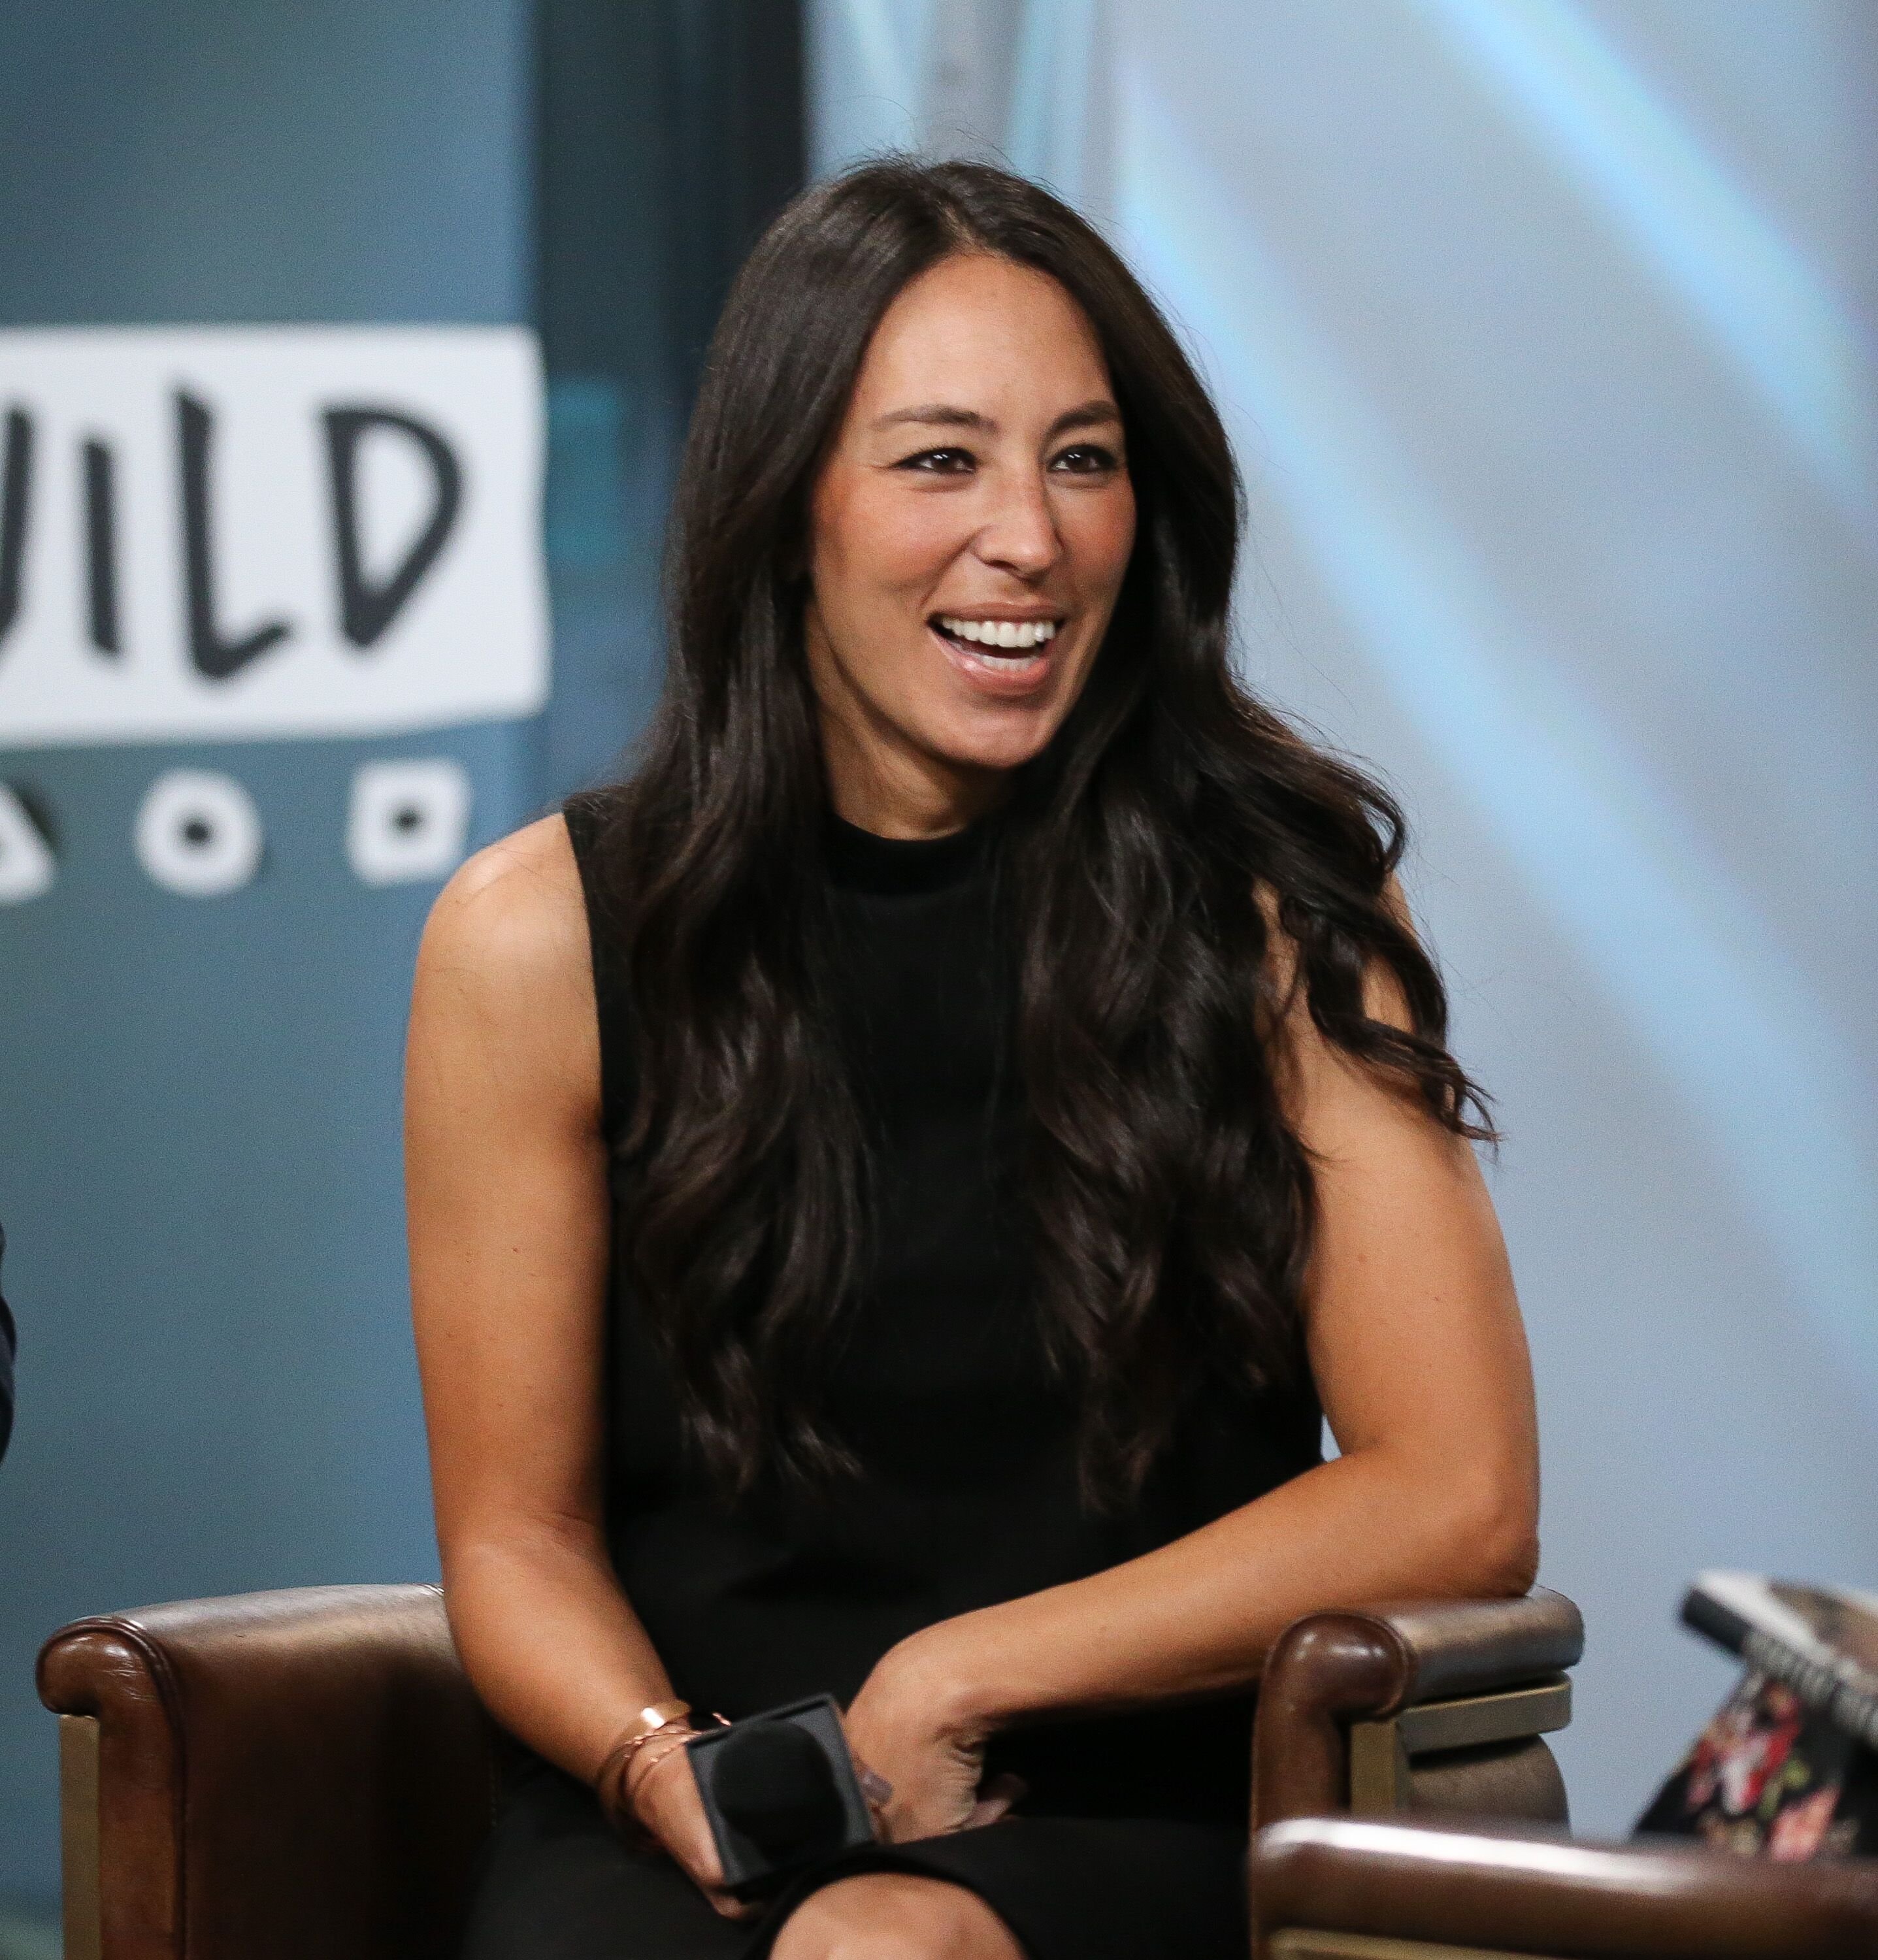 Joanna Gaines discusses new book, "Capital Gaines: Smart Things I Learned Doing Stupid Stuff" at Build Studio on October 18, 2017 in New York City | Photo: Getty Images